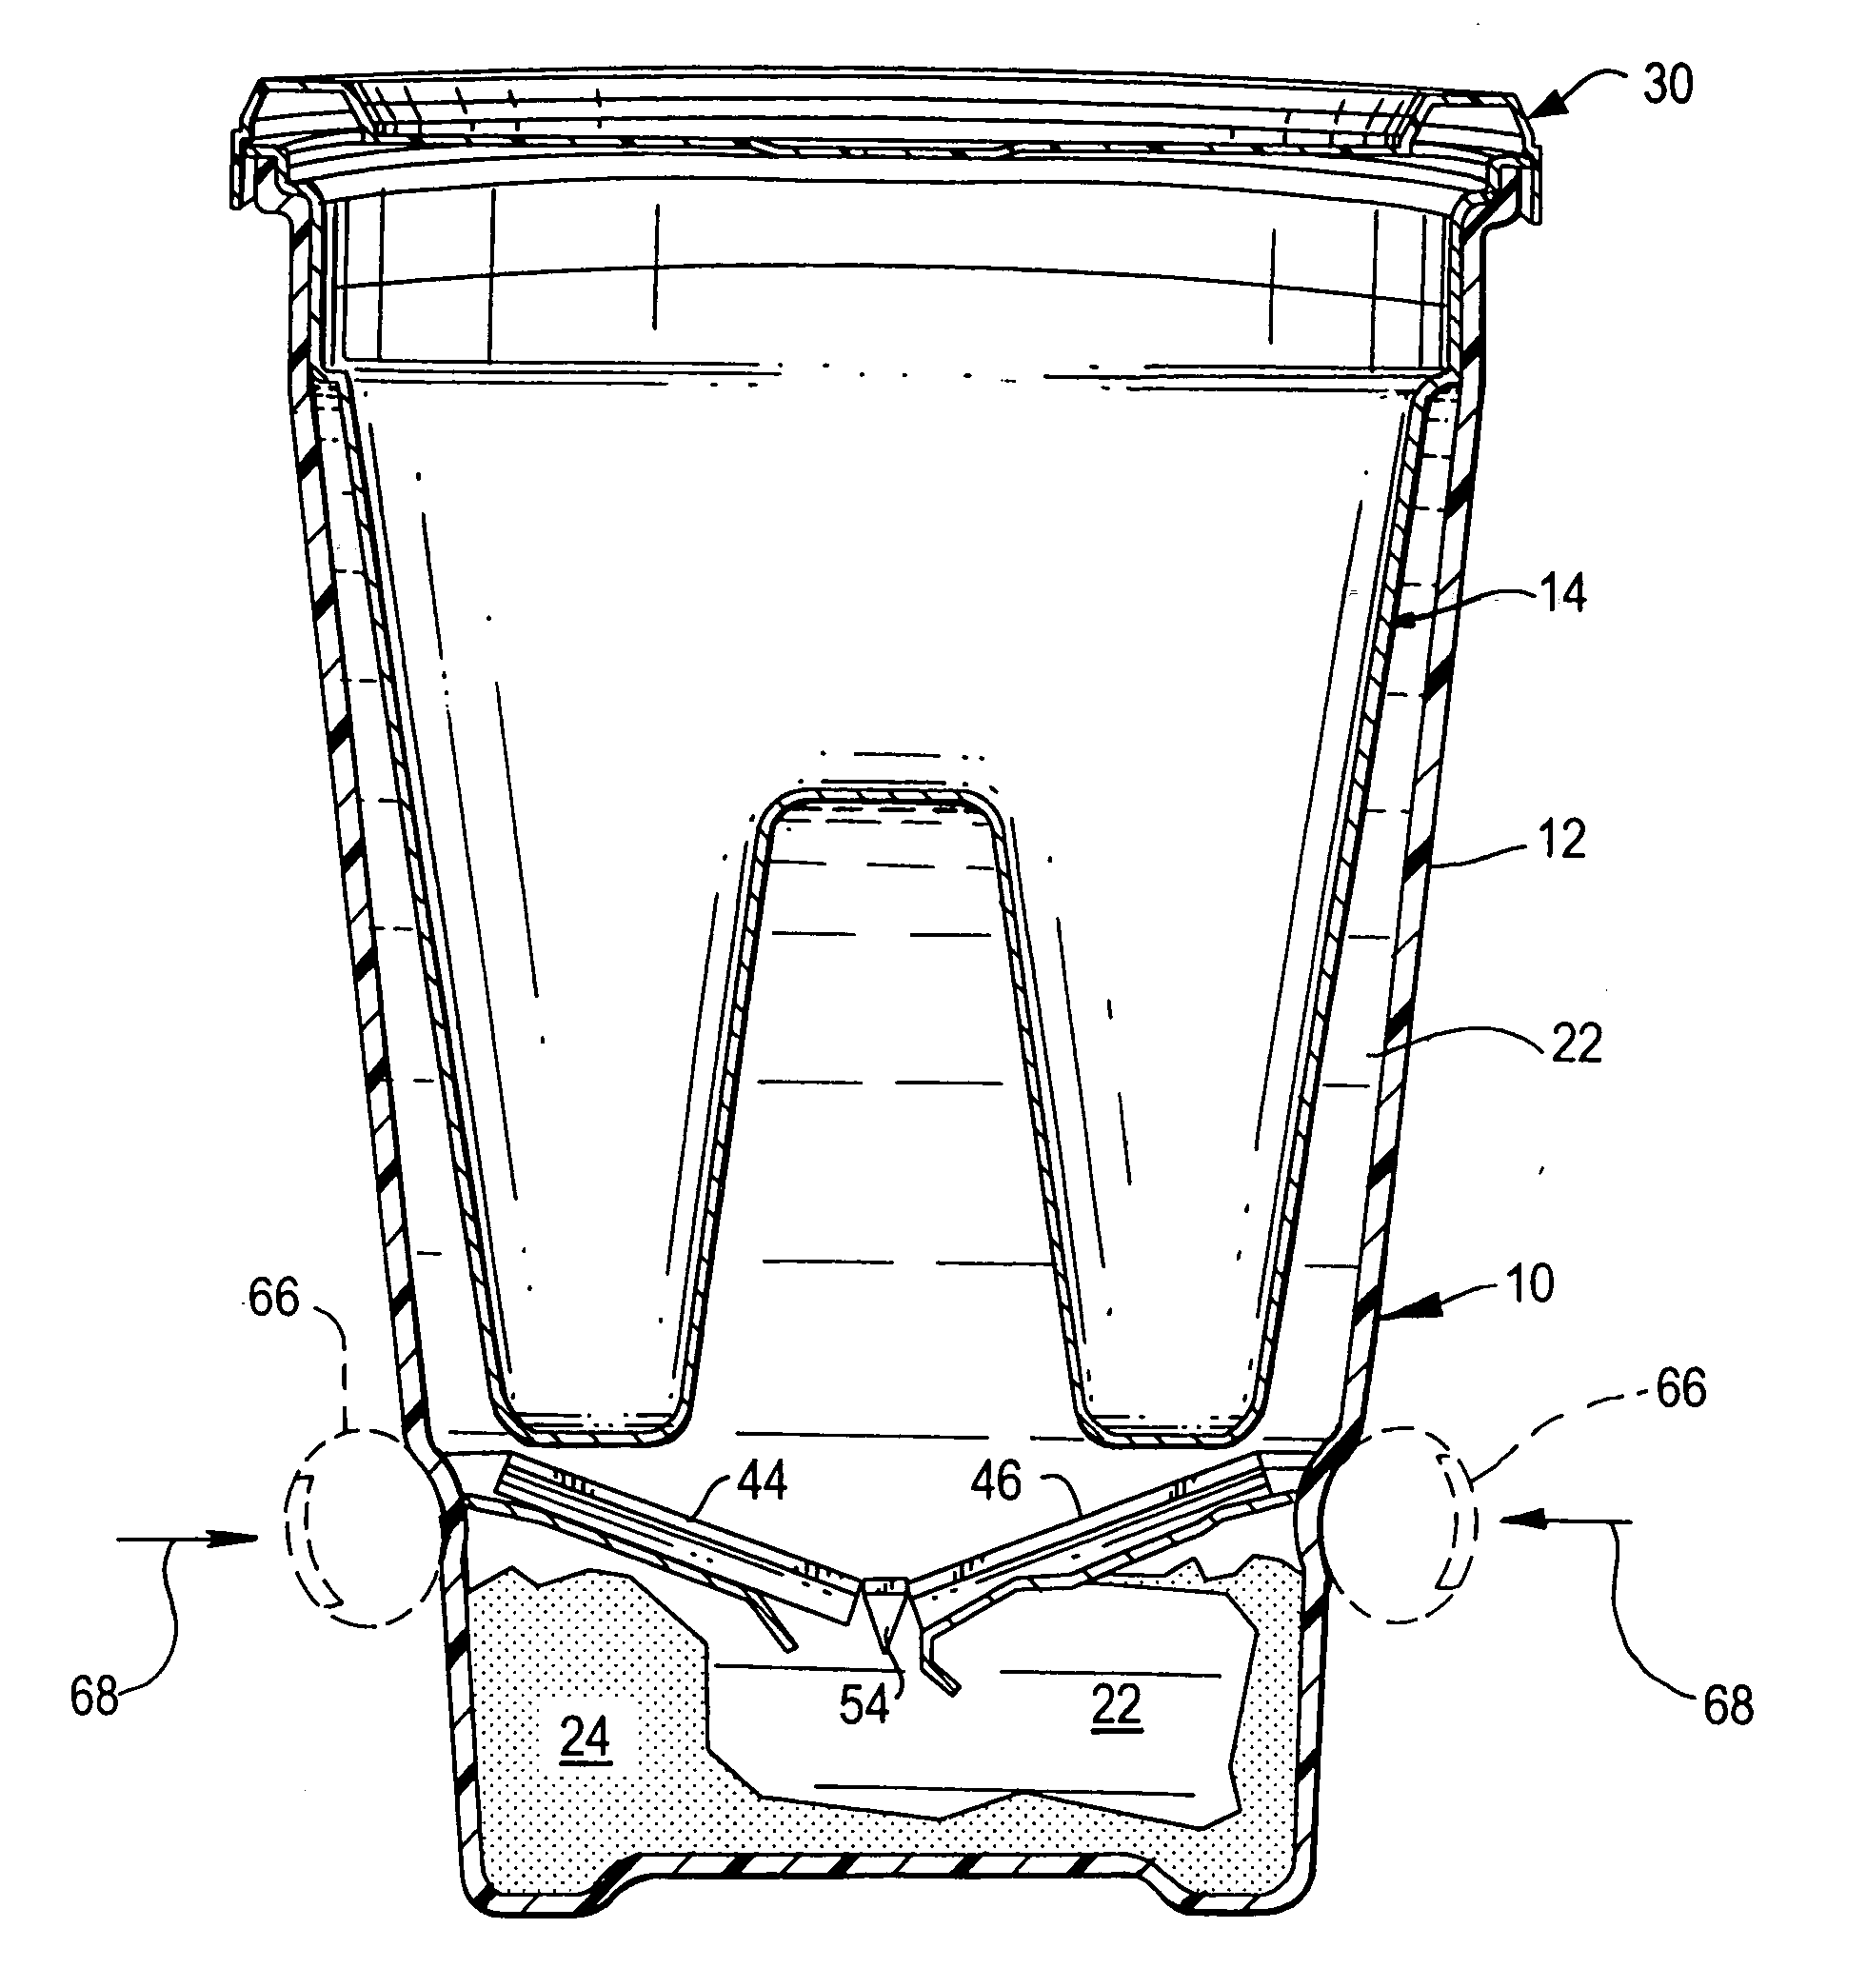 System for and method of making an arrangement for changing the temperature of a product